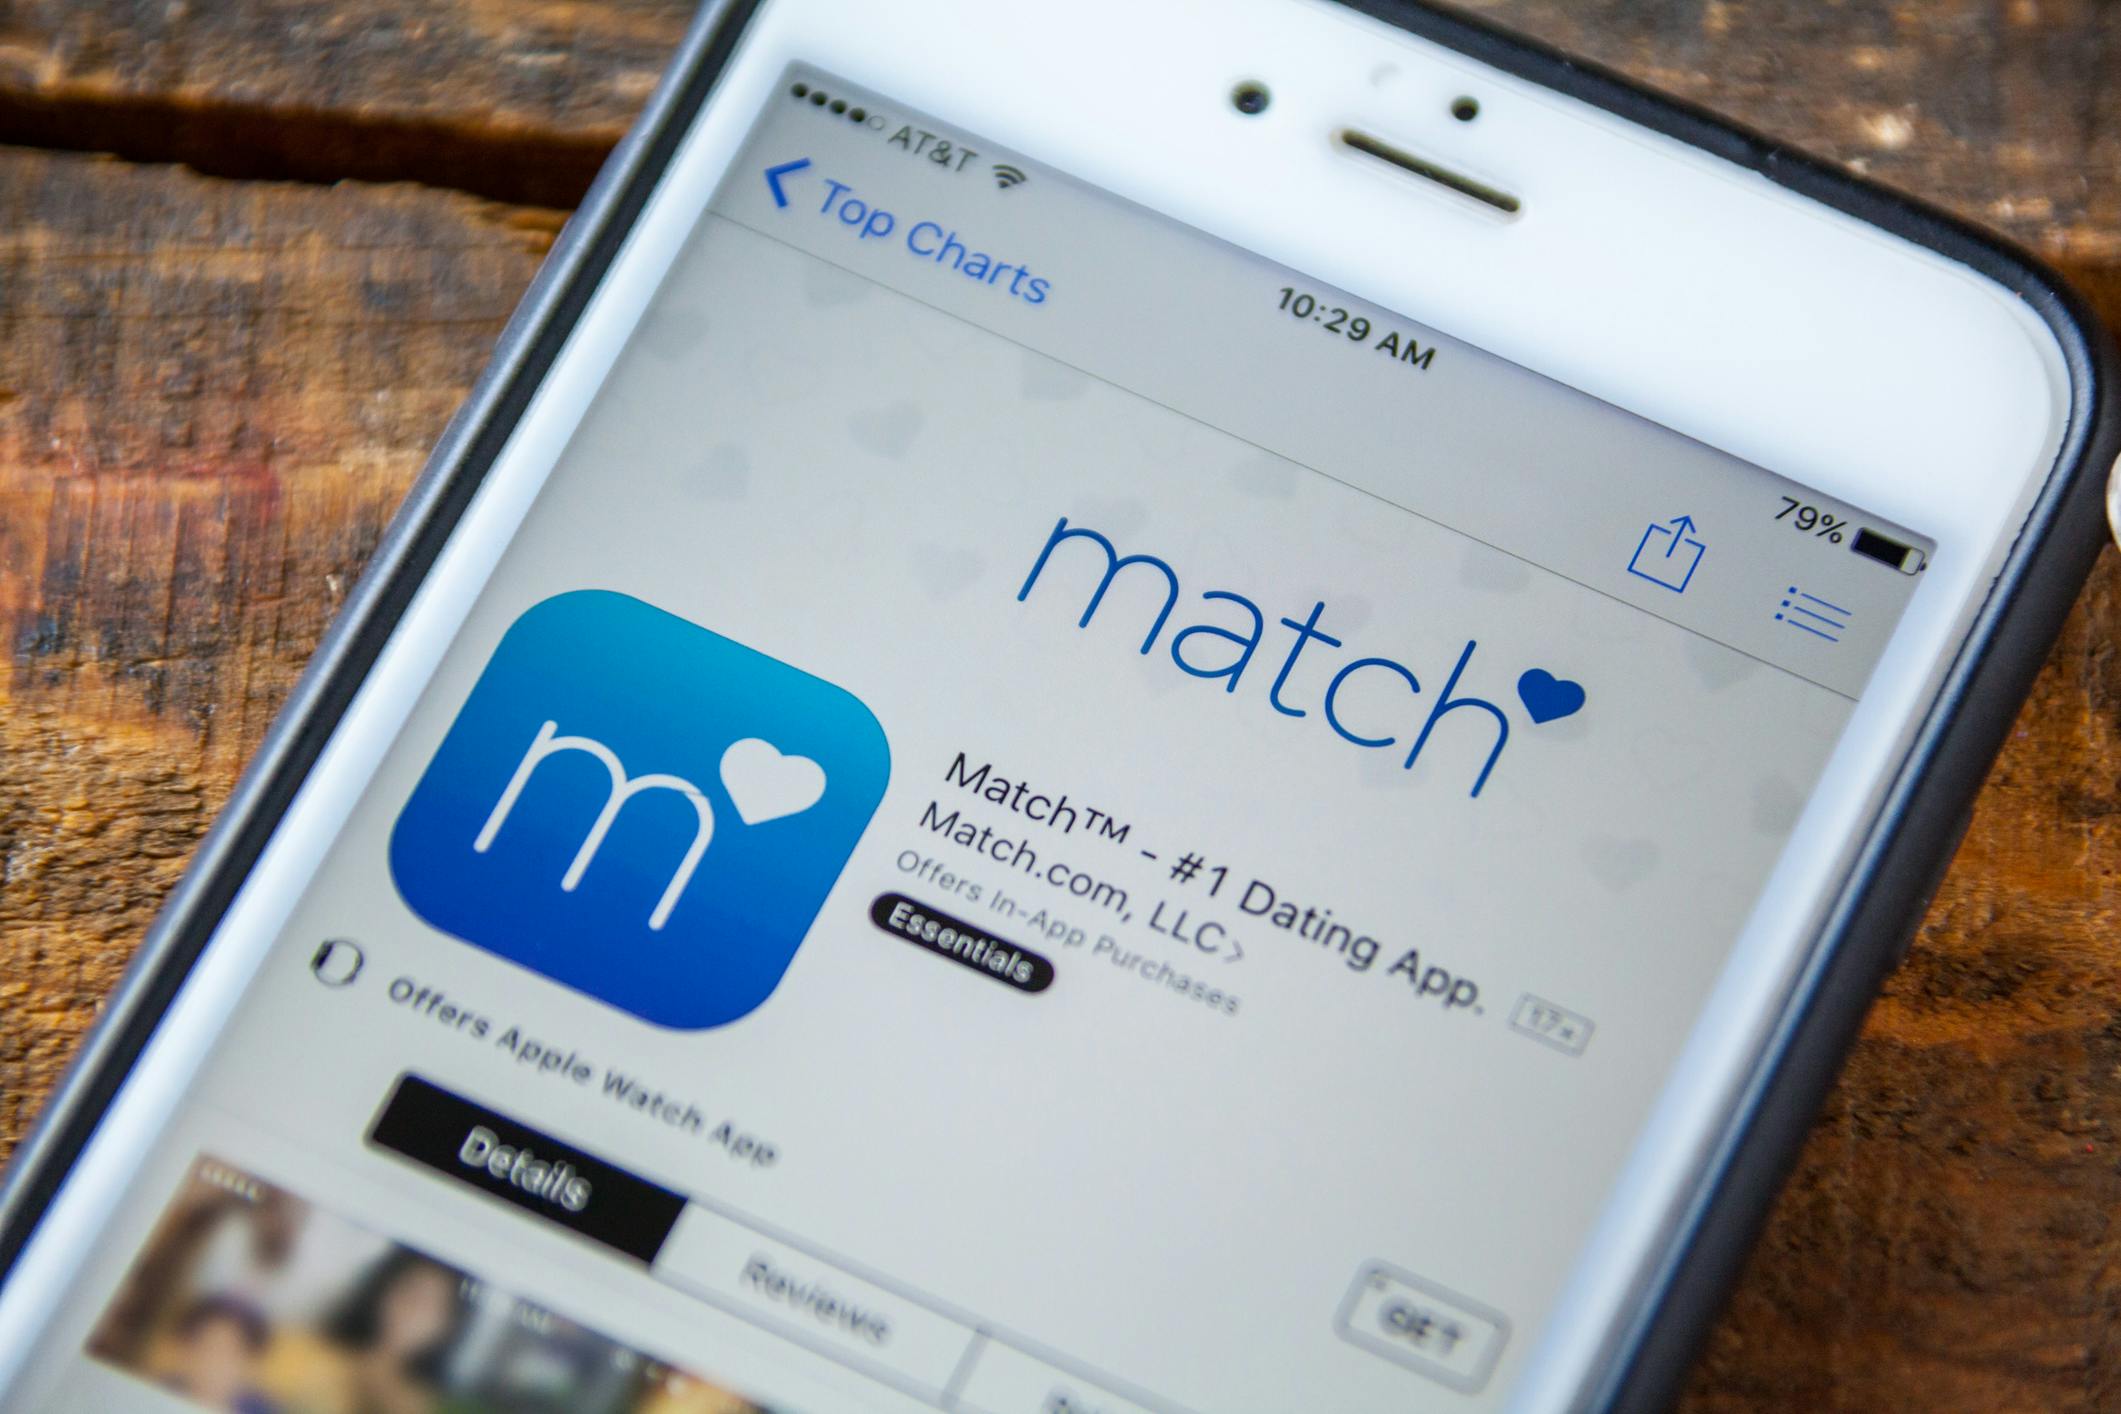 Match Group CEO, Bumble decry Texas law, start aid funds | Star Tribune